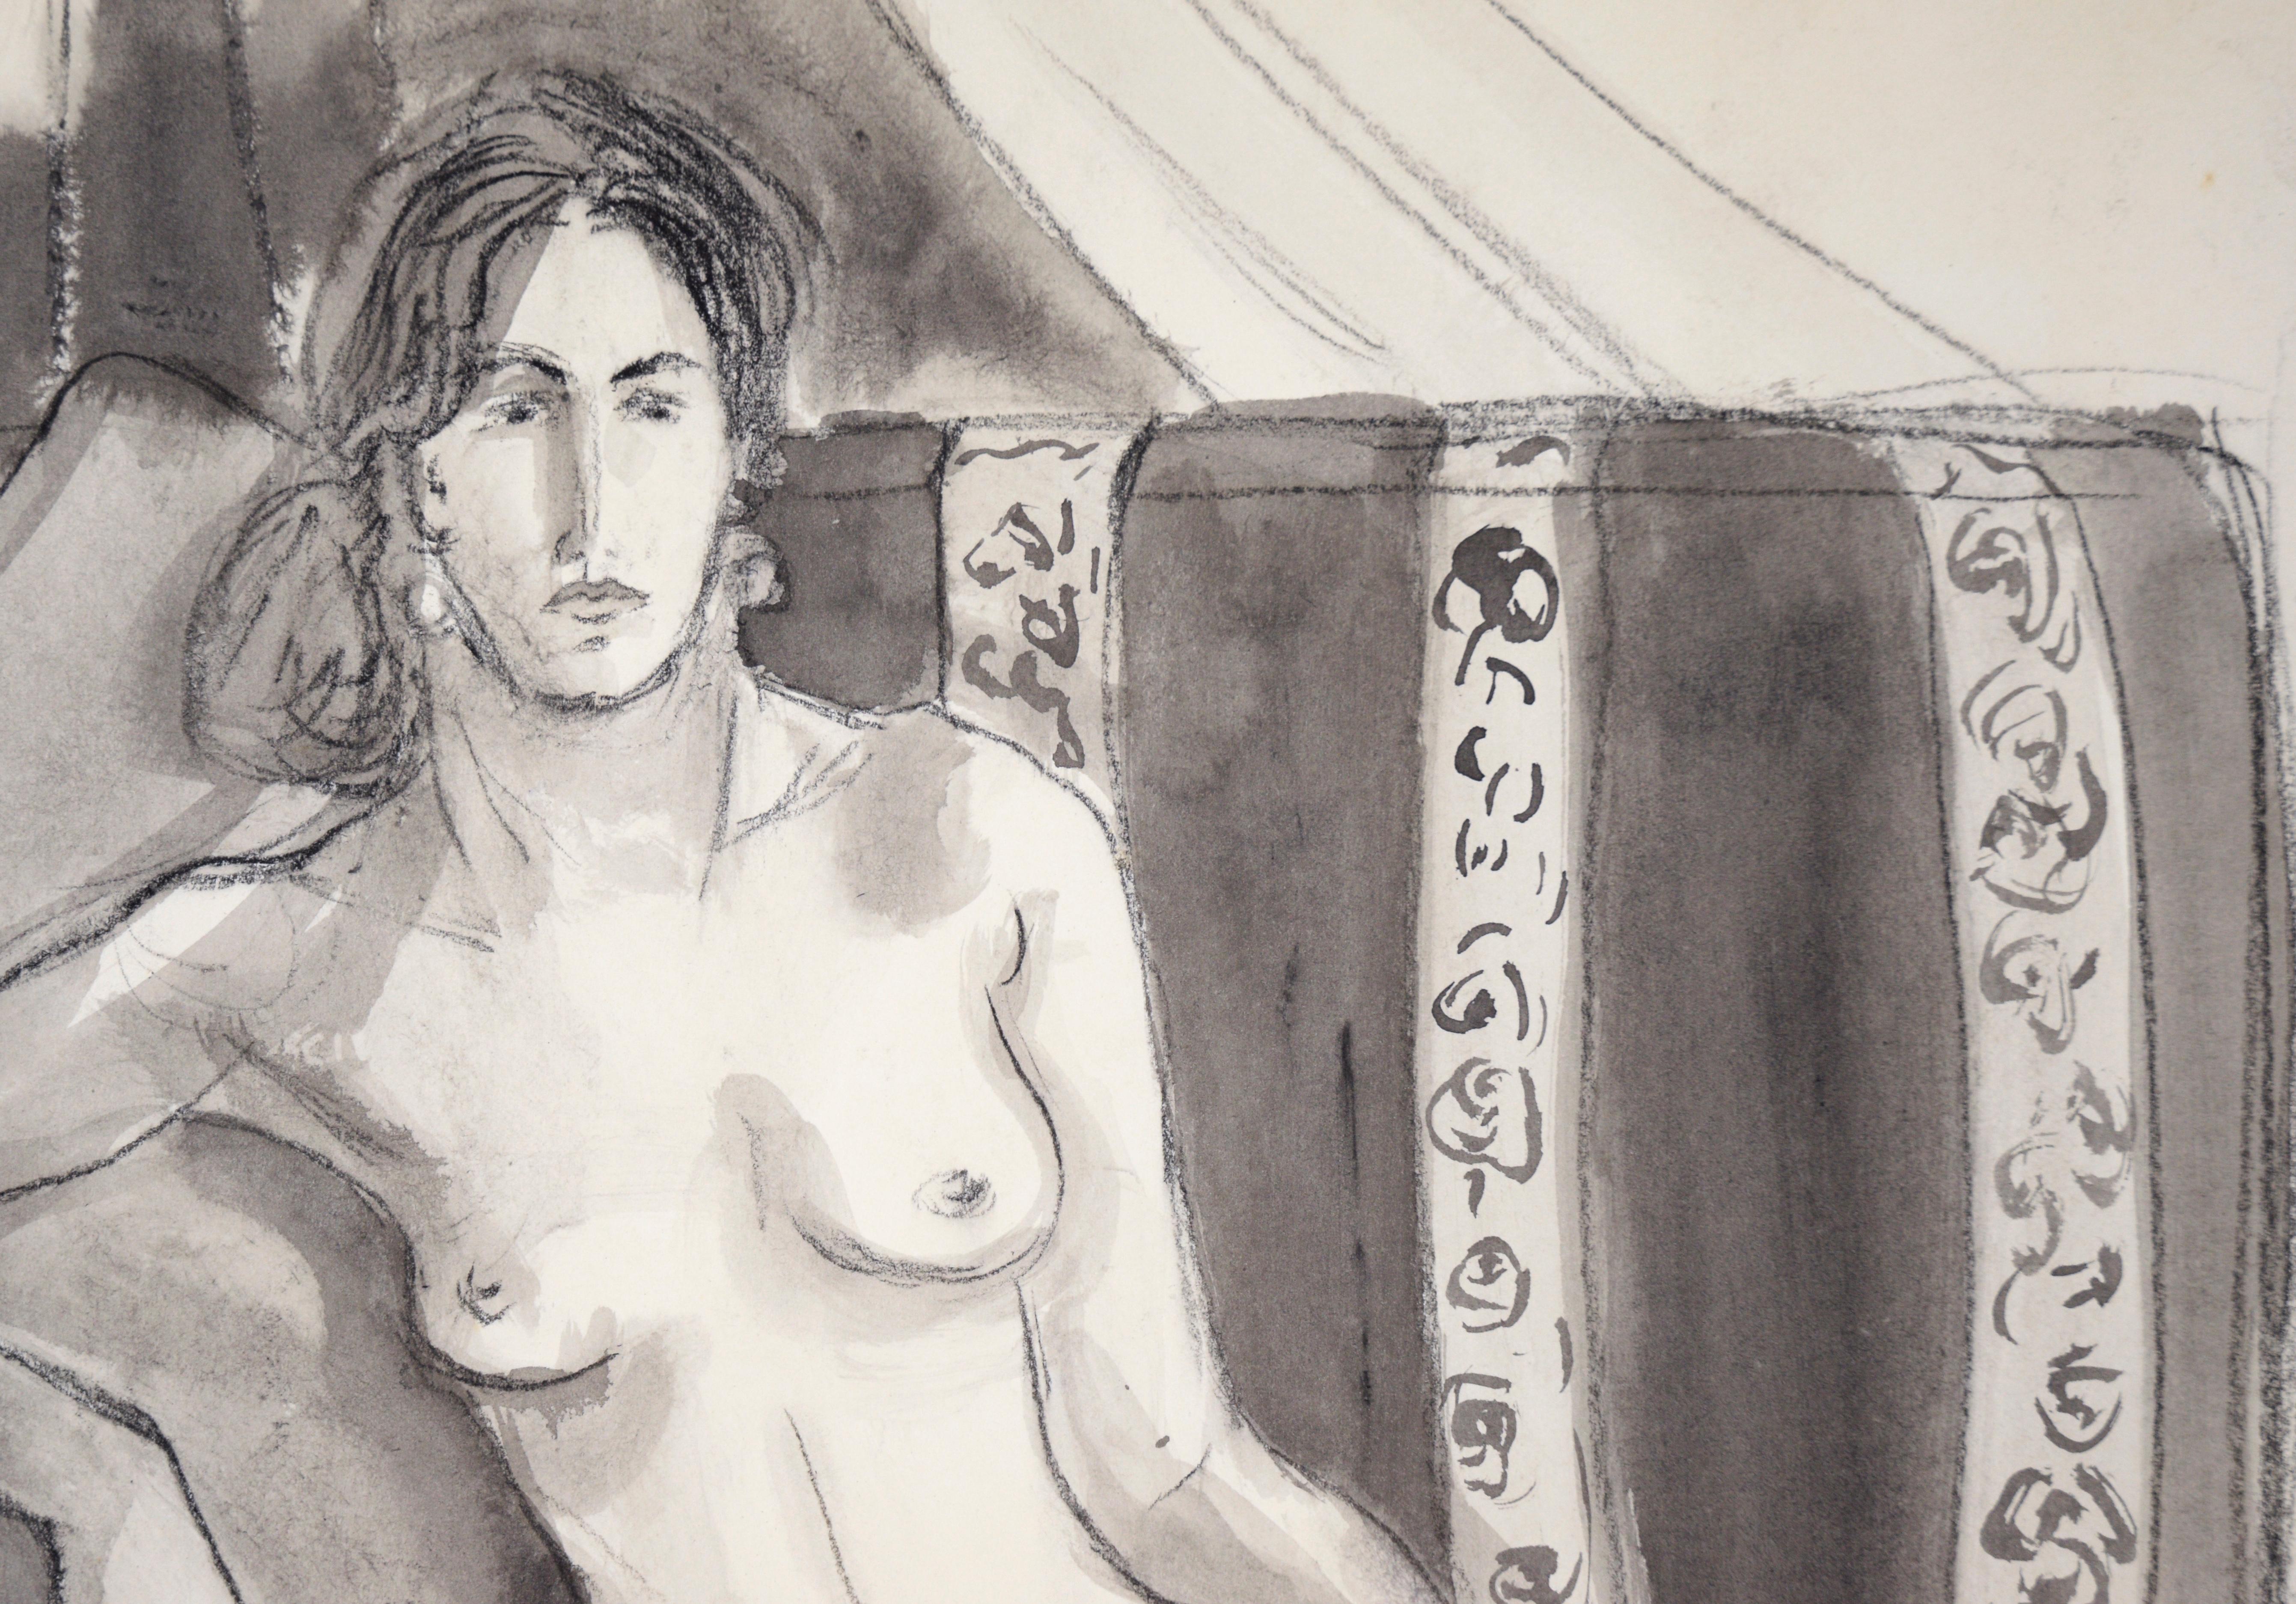 Nude Woman on Striped Chair #1 in Charcoal and Gouache on Paper - Contemporary Painting by Katherine Kallick